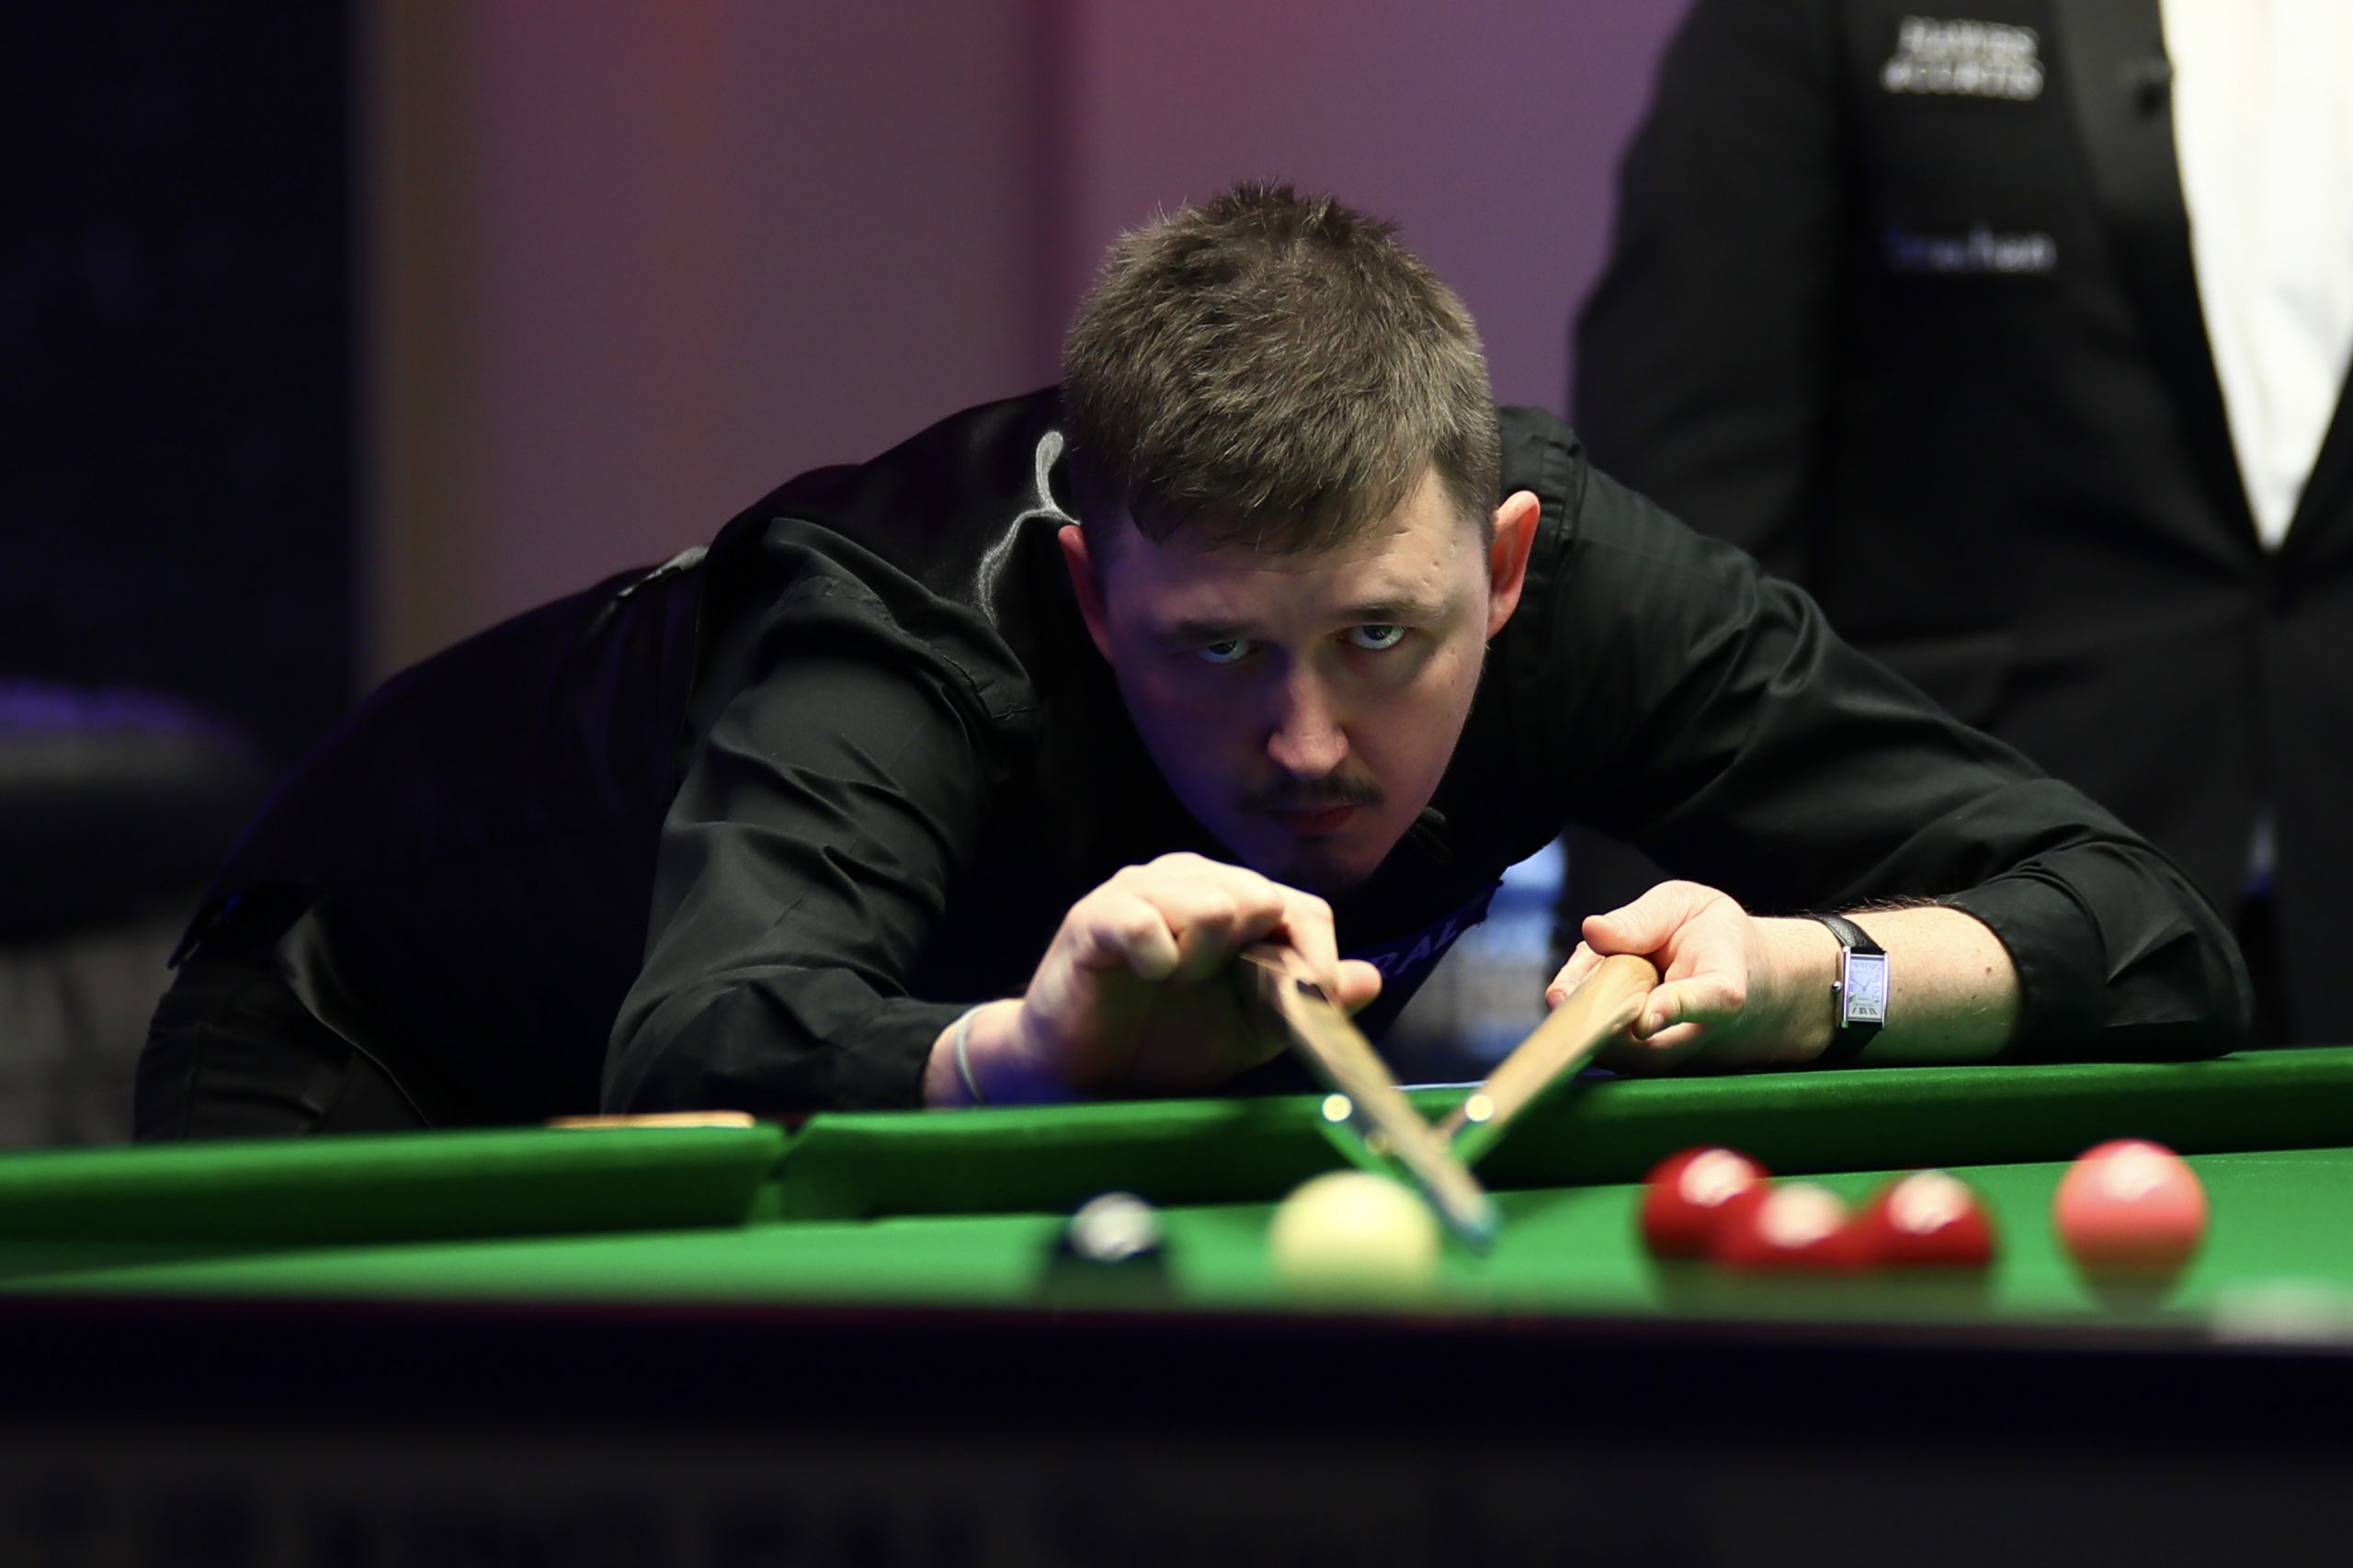 Updated OSullivan to face Wilson in World Snooker final after Crucible drama